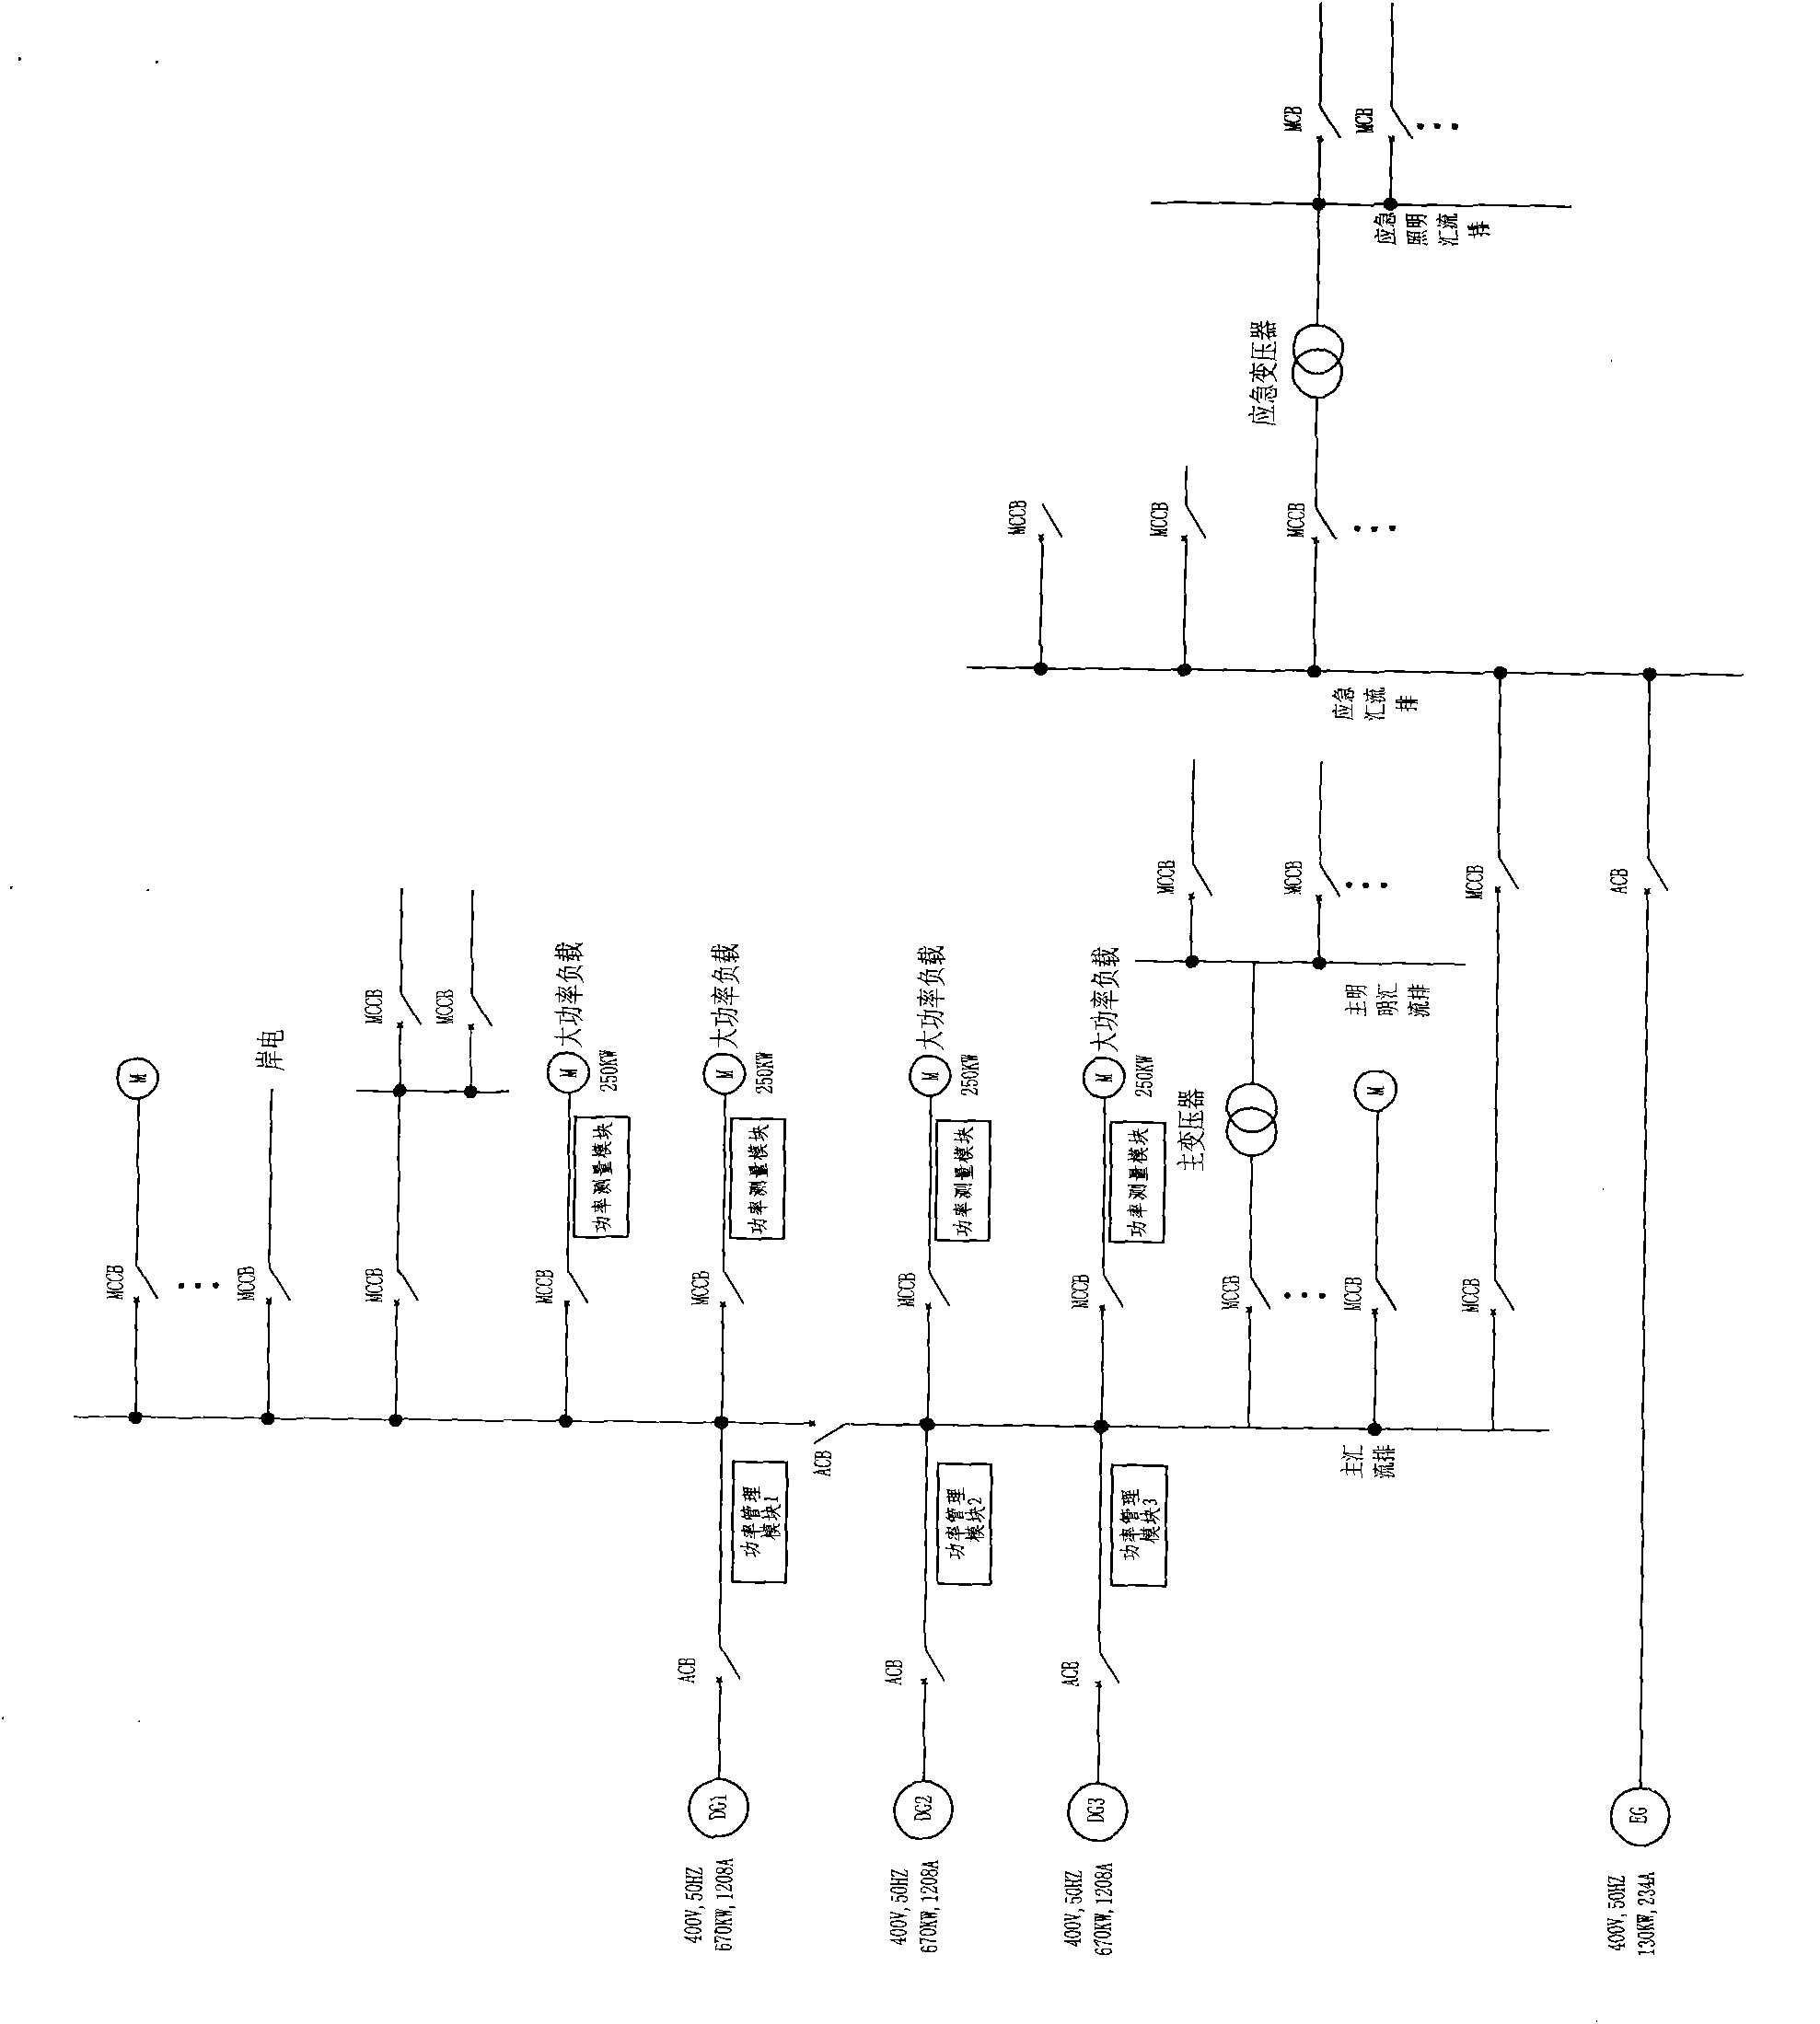 Method for inquiring heavy load of ship power station power management